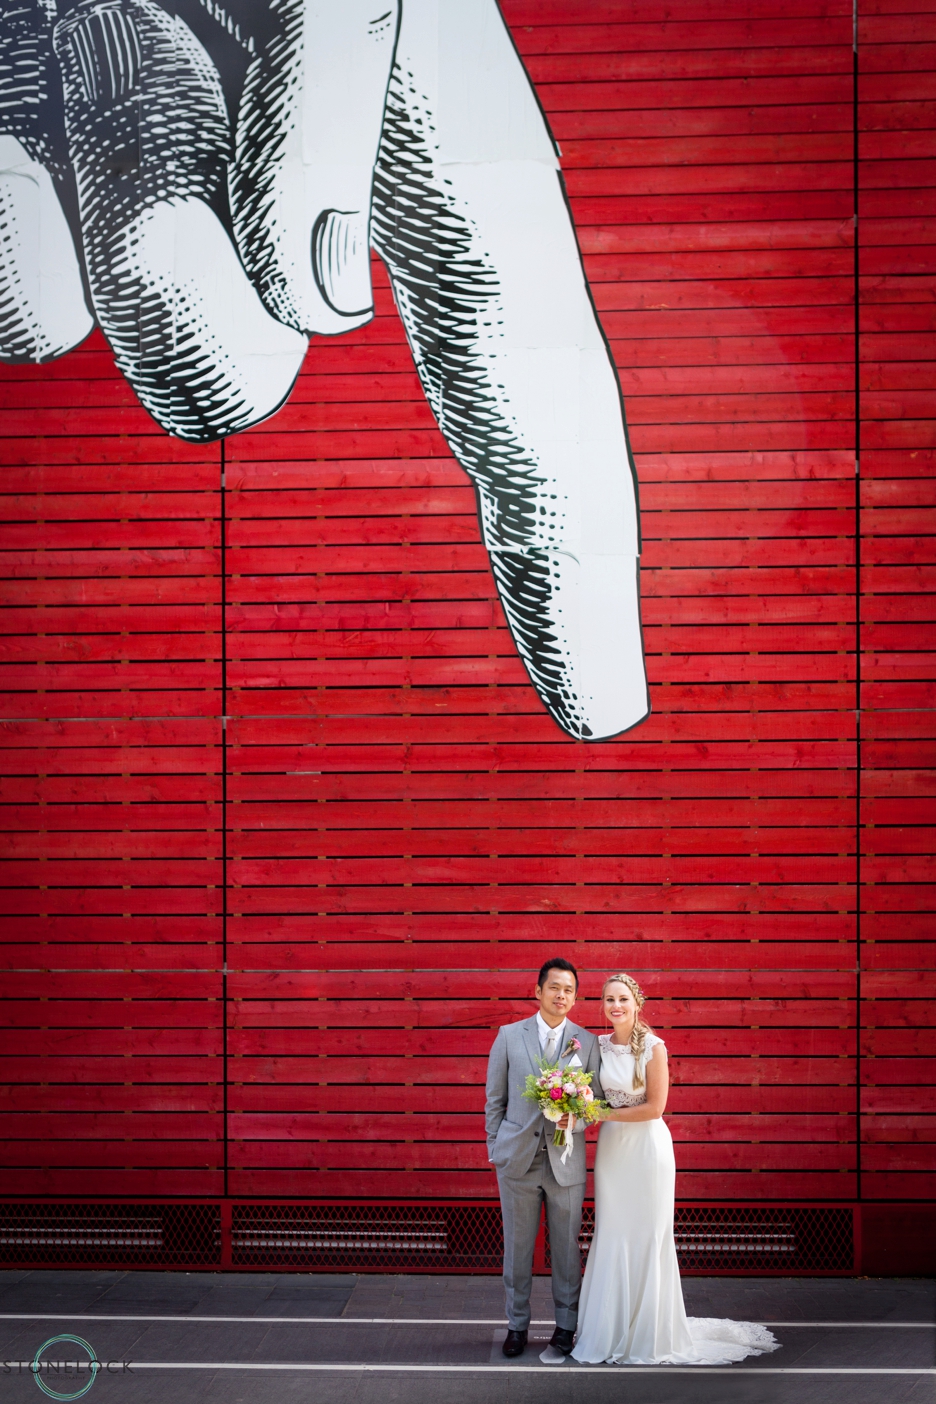 Bride and Groom outside the National Theatre on London's Southbank